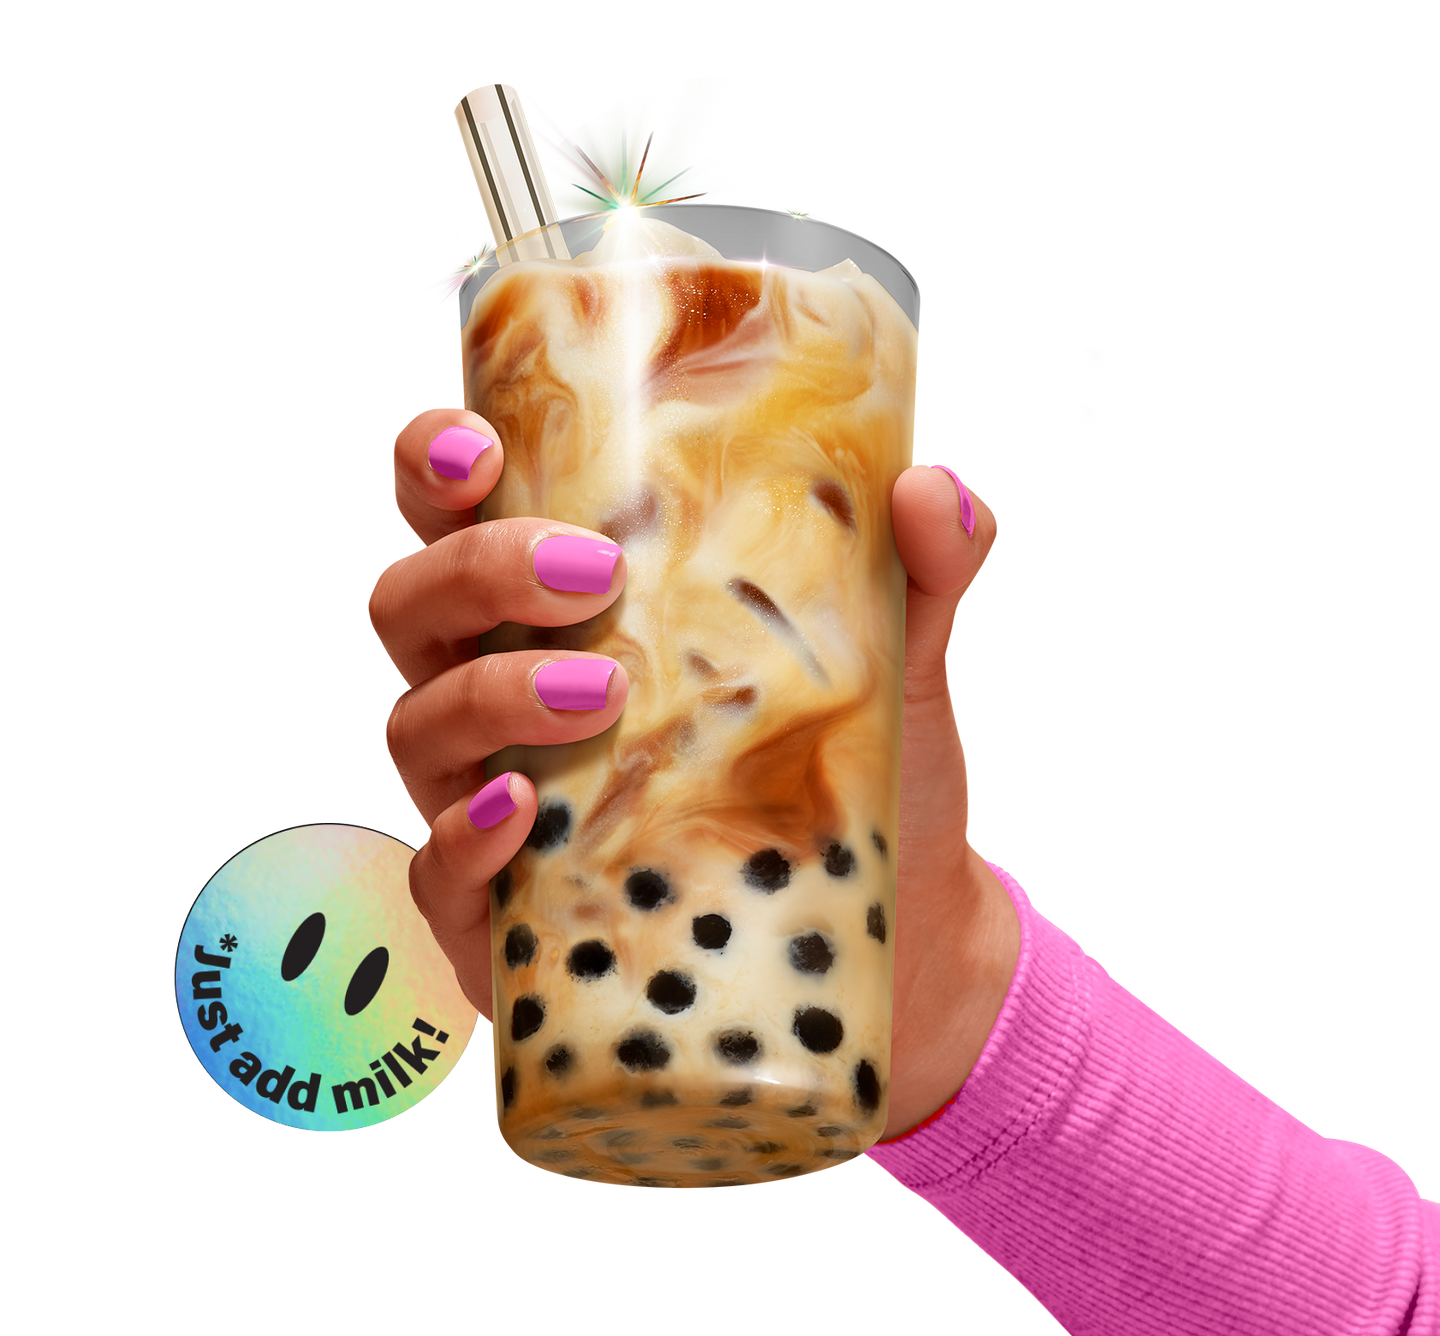 Woman's hand with pink nail polish and pink sleeve holding a BOBABAM brown sugar bubble tea drink and a holographic smiley face sticker next to it that says "just add milk!"